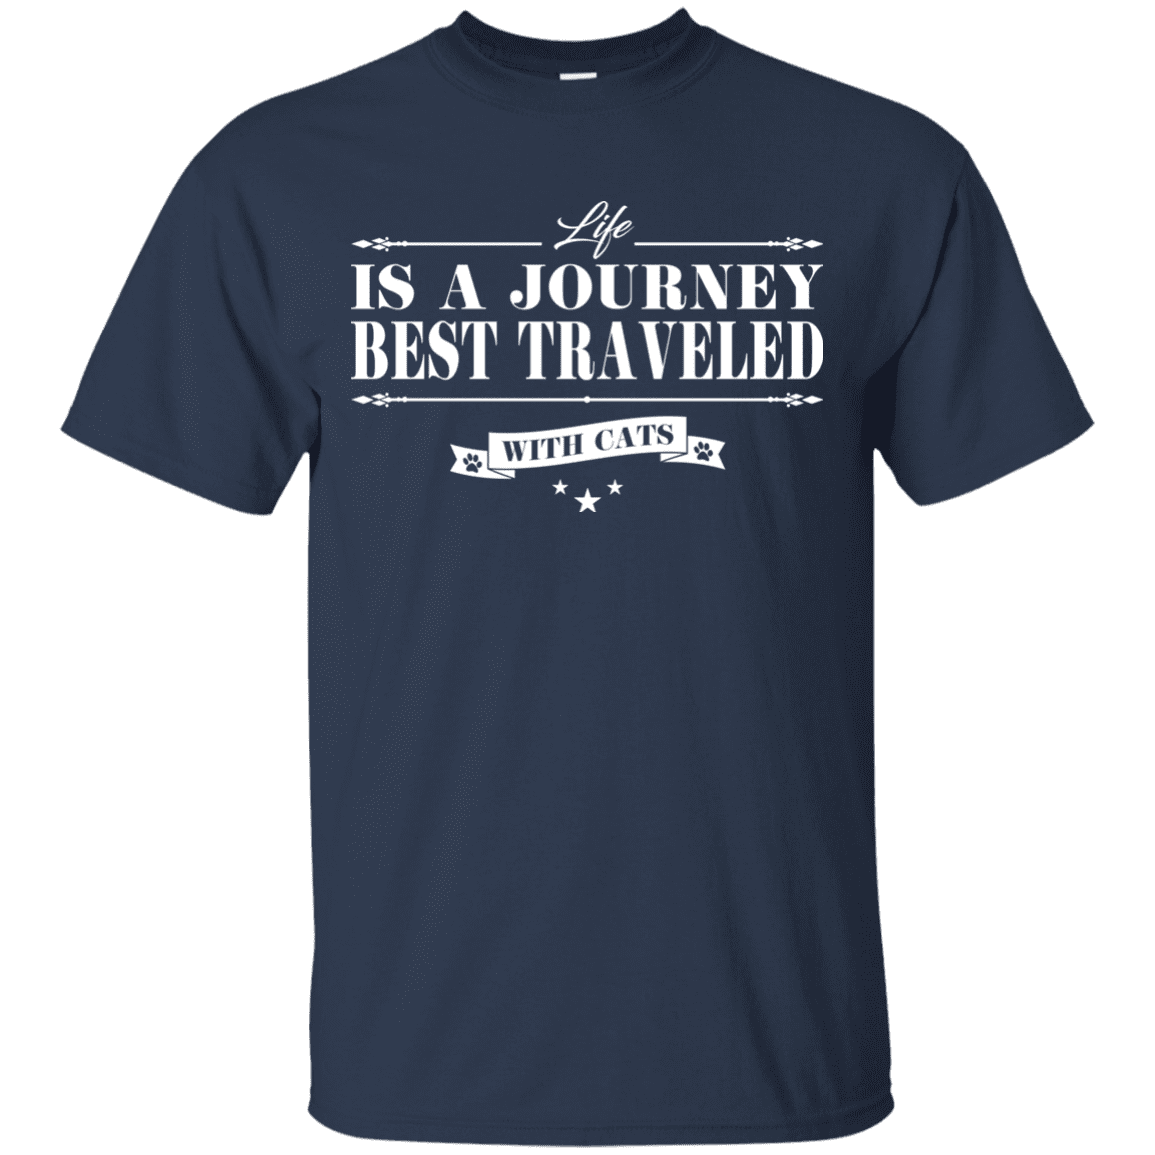 Life Is a Journey Best Travelled With Cats - T Shirt.